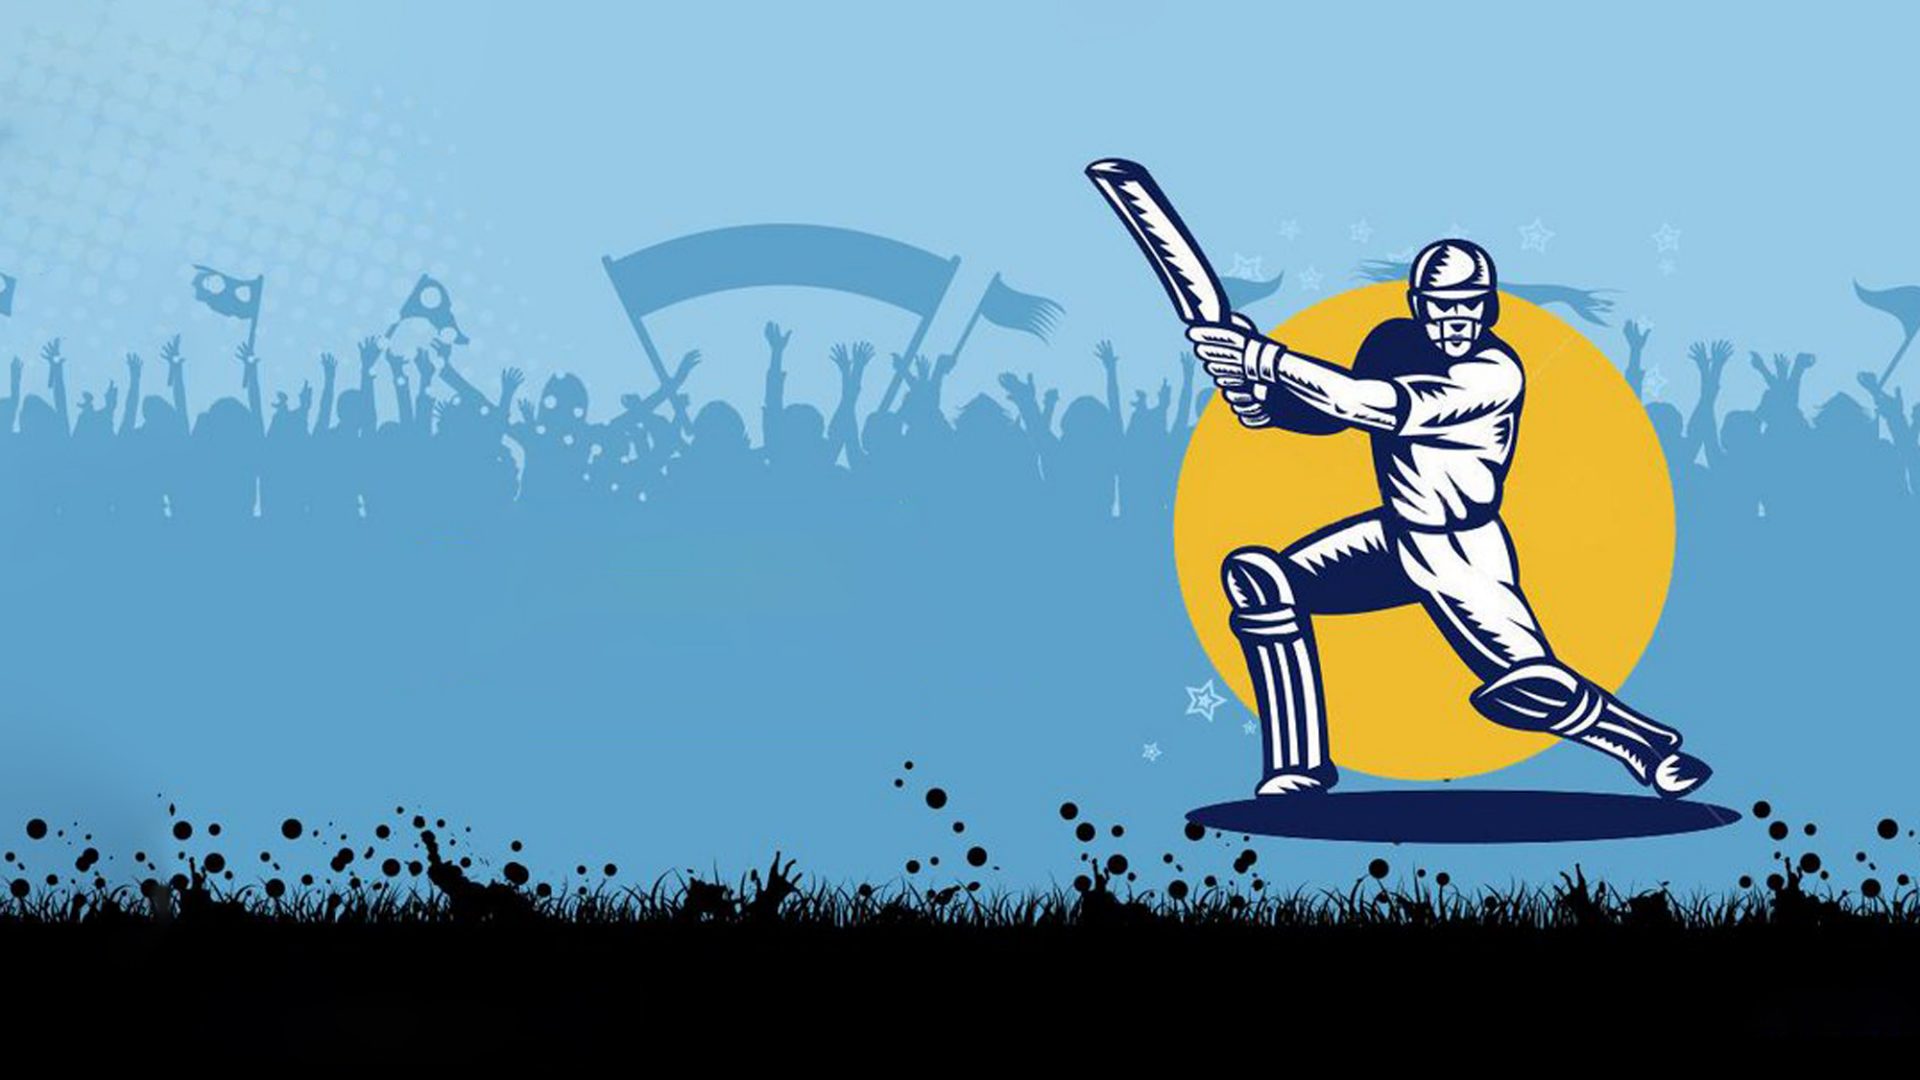 Brand Engages Its Cricket Mad Audience